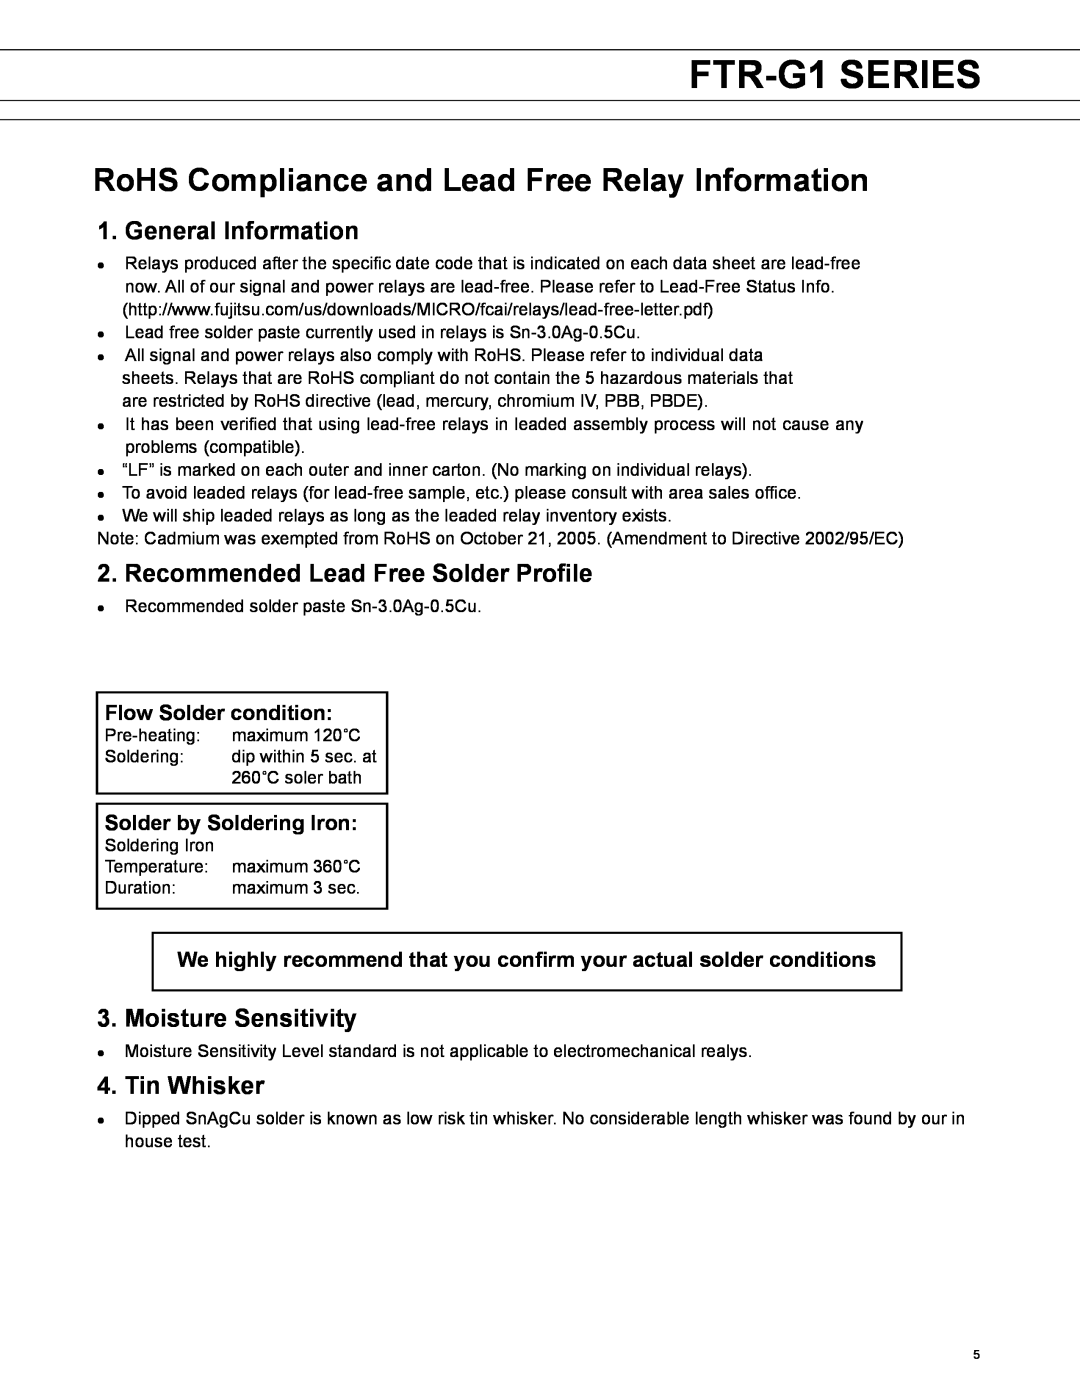 Fujitsu Flow Solder condition, Solder by Soldering Iron, FTR-G1 SERIES, RoHS Compliance and Lead Free Relay Information 